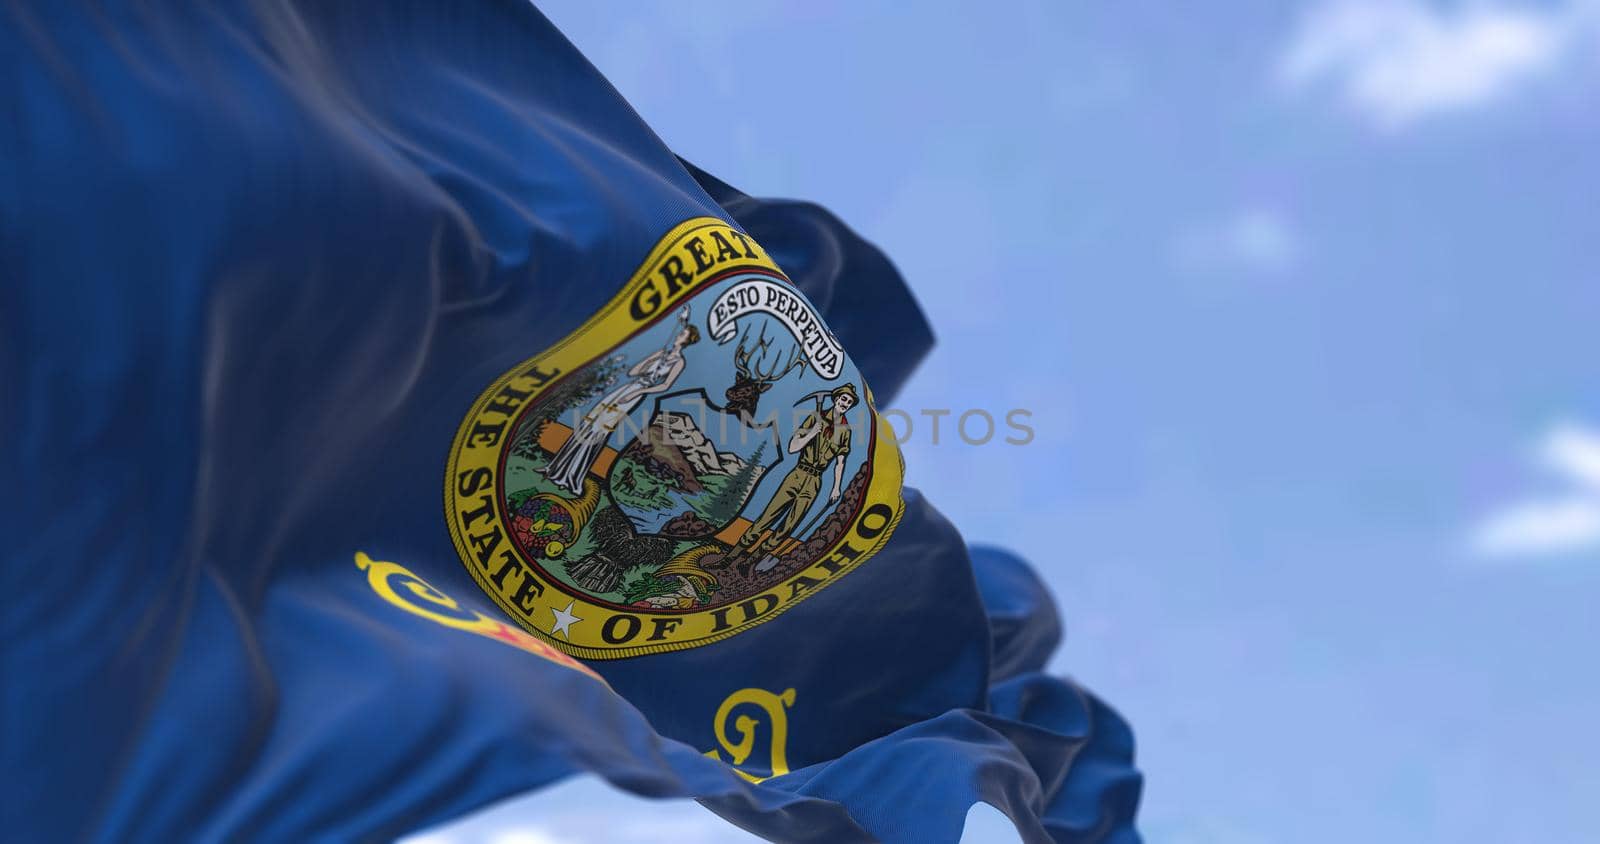 The US state flag of Idaho waving in the wind. Idaho is a state in the Pacific Northwest region of the United States. Democracy and independence.